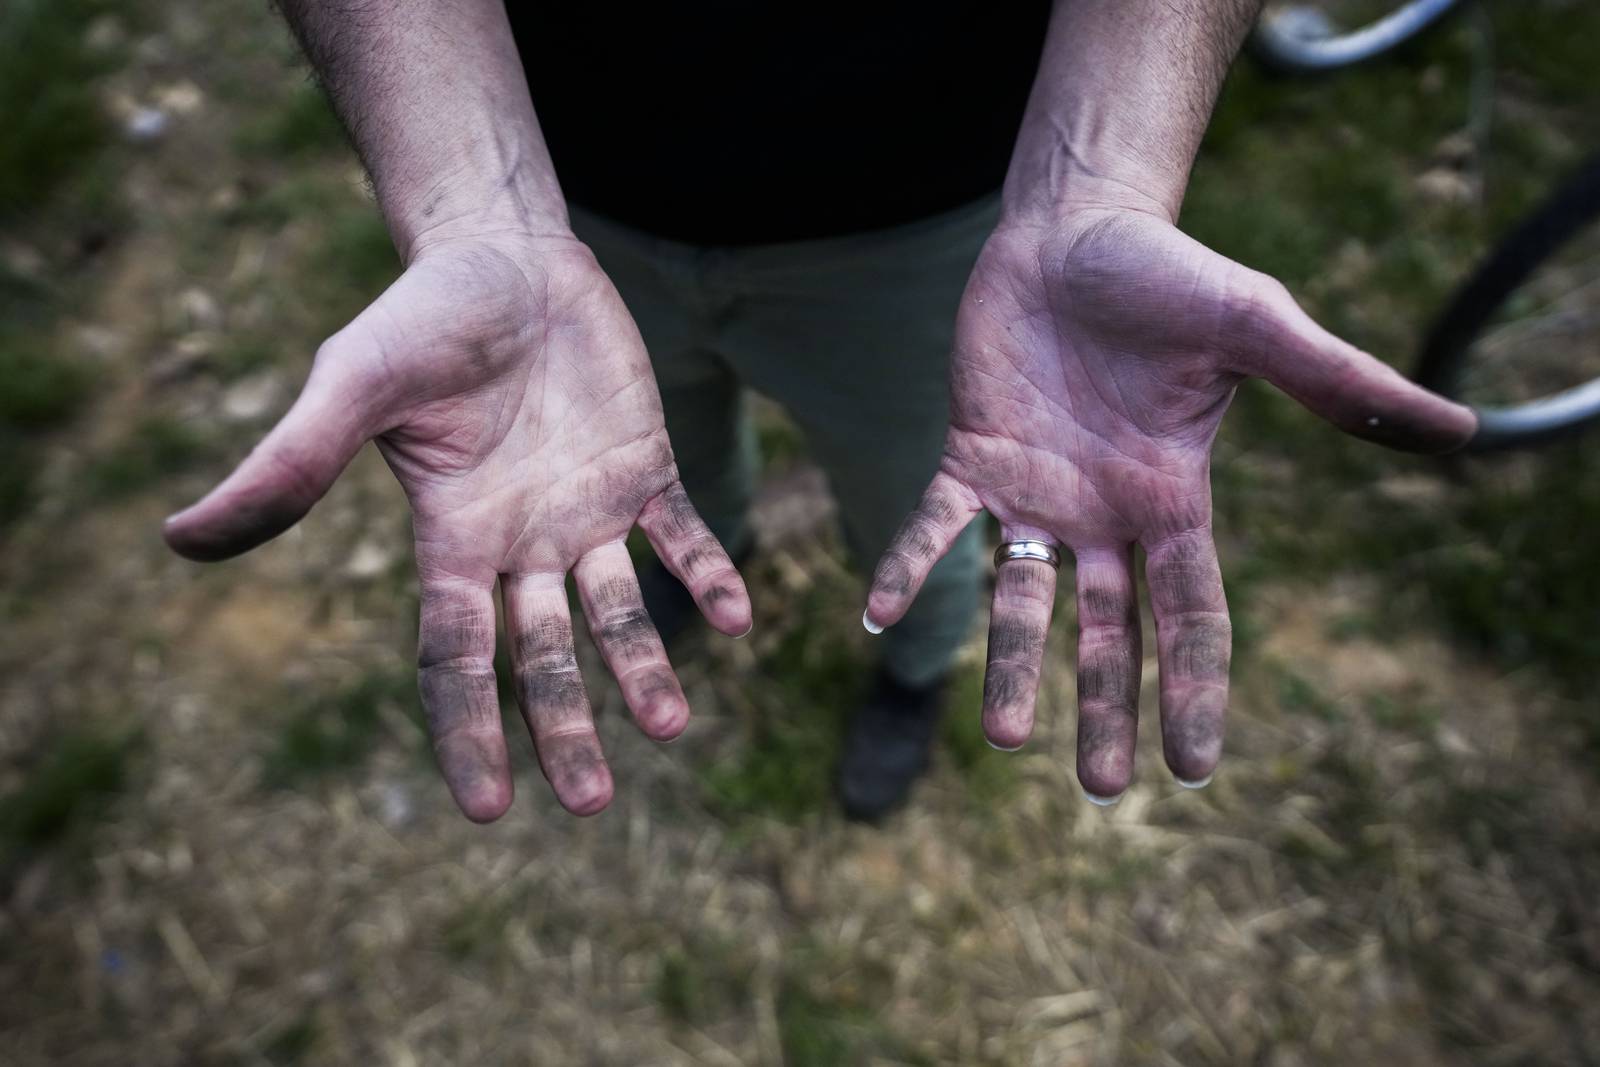 The hands of teacher August DiMucci are covered in dirt and grease from helping students with their bike engineering.